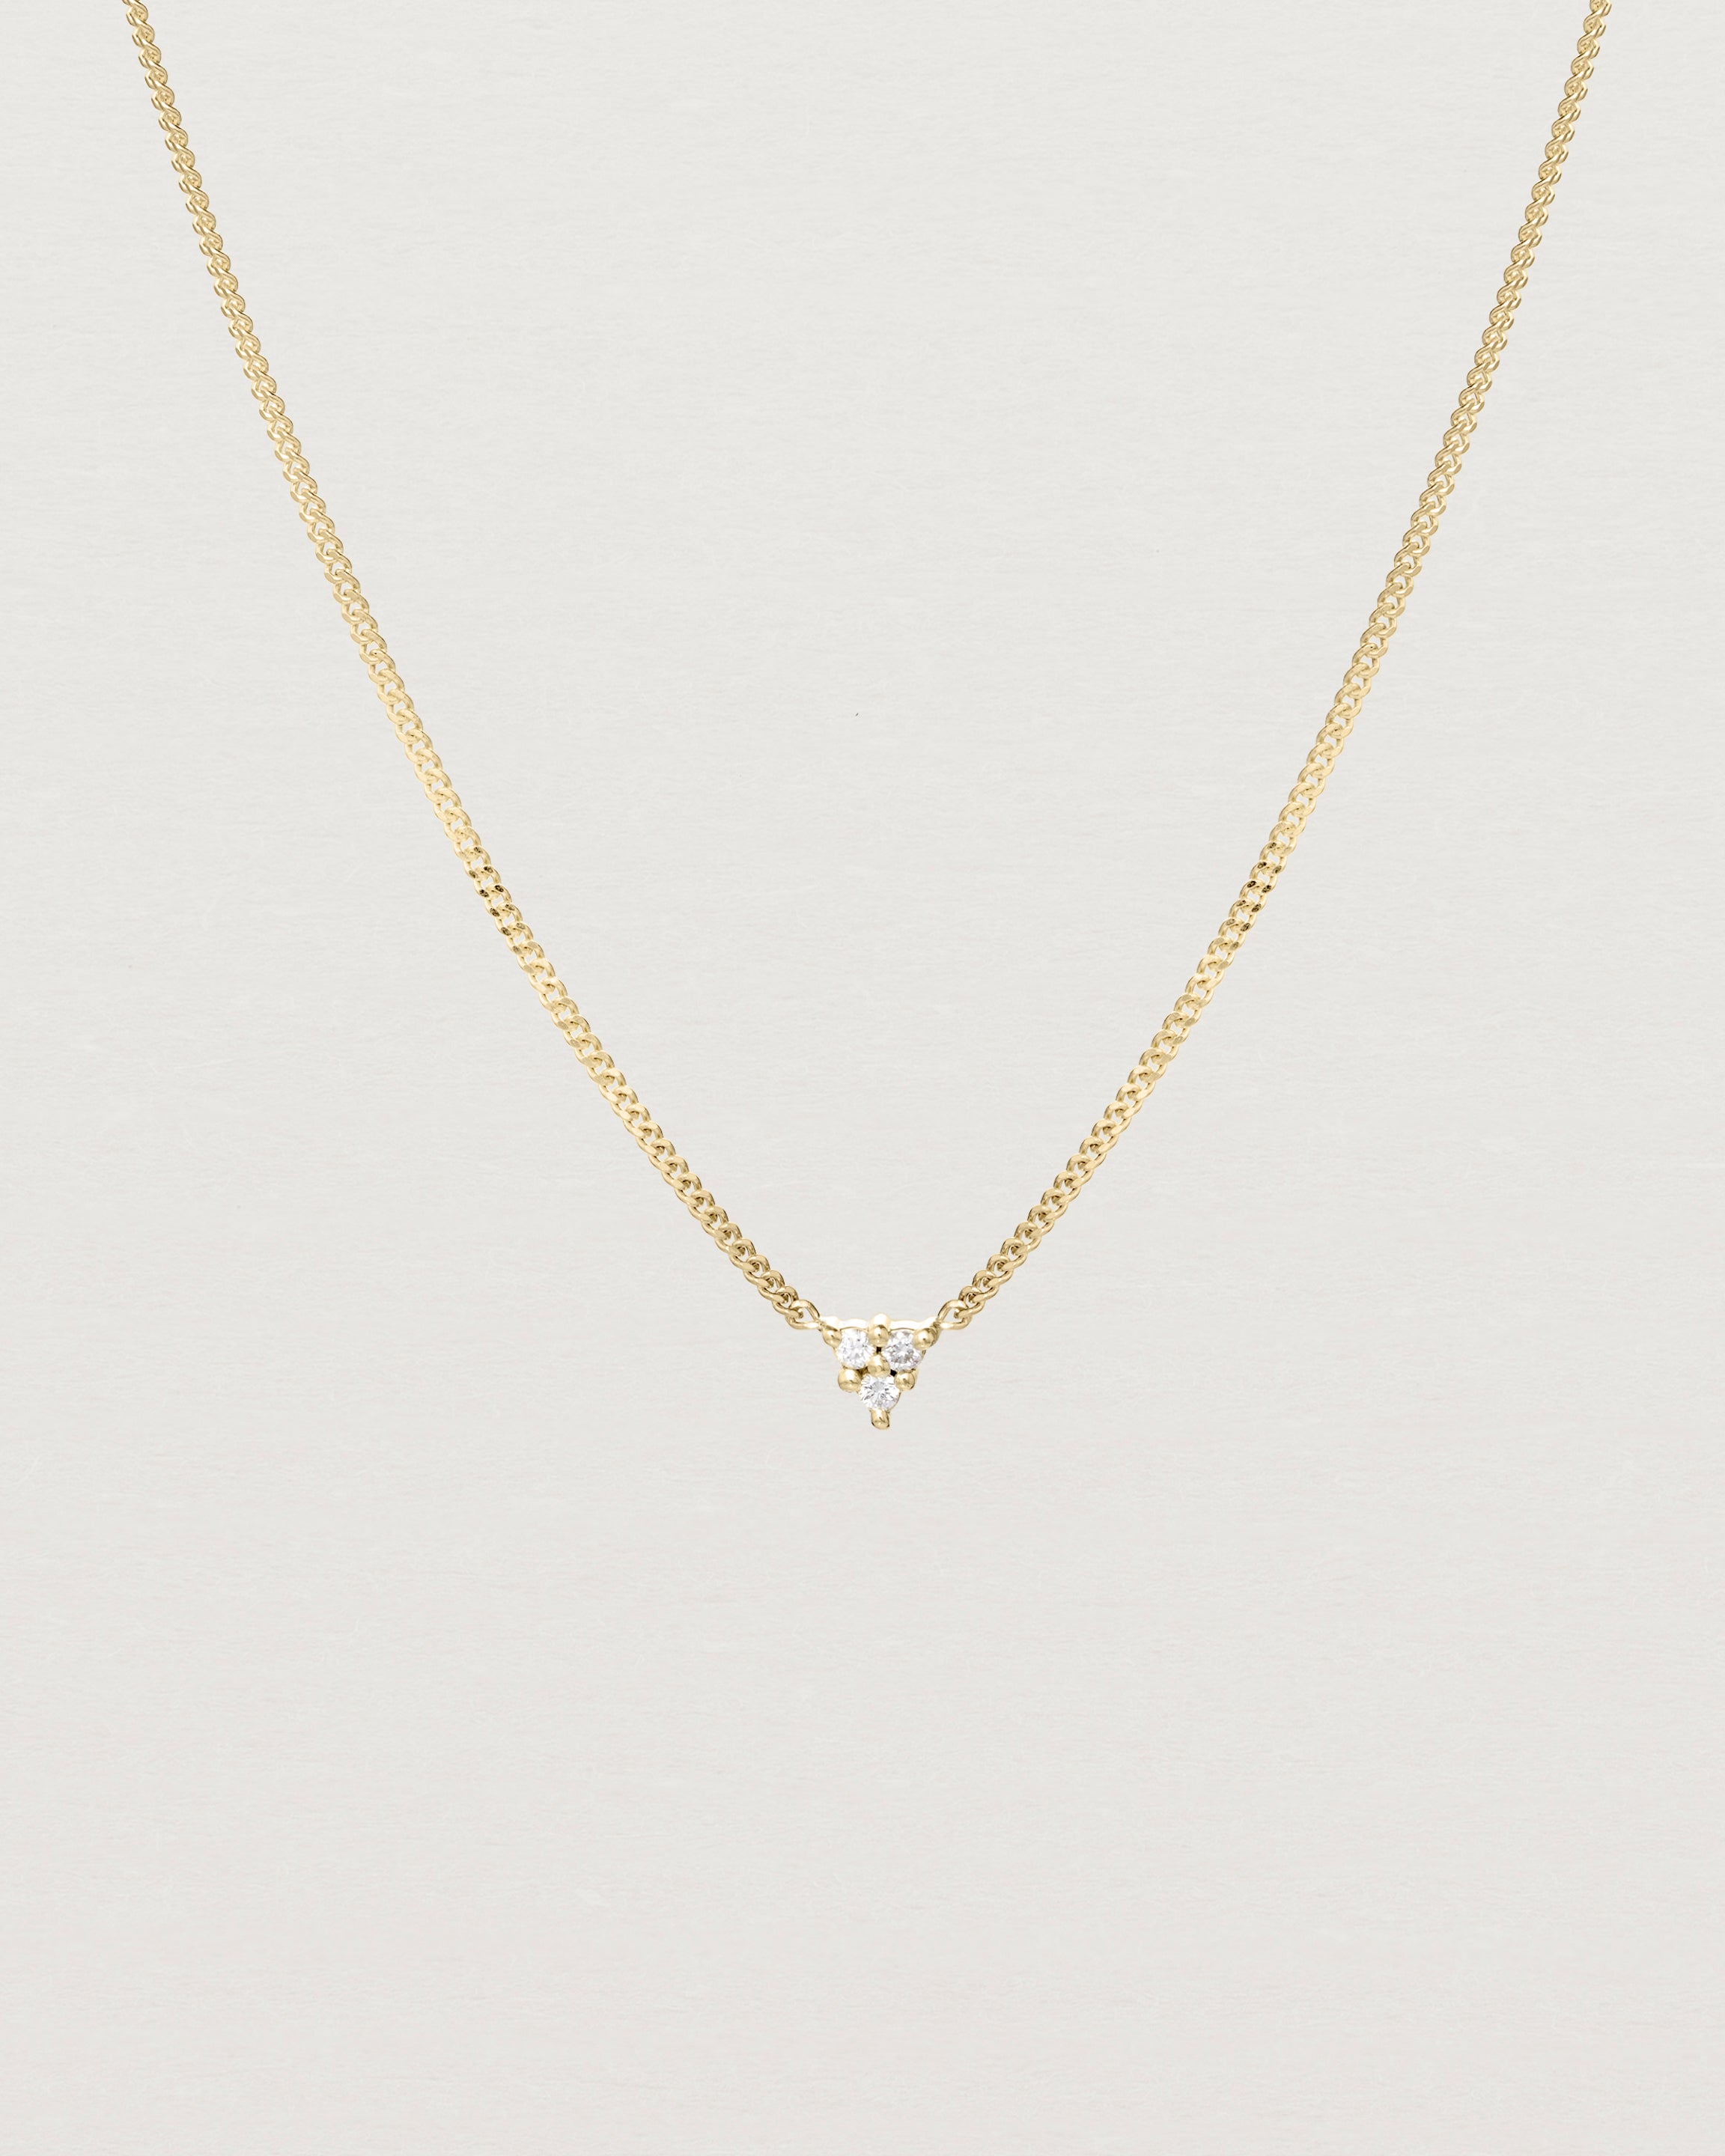 Close up view of the Kalani Necklace | Diamonds in yellow gold.